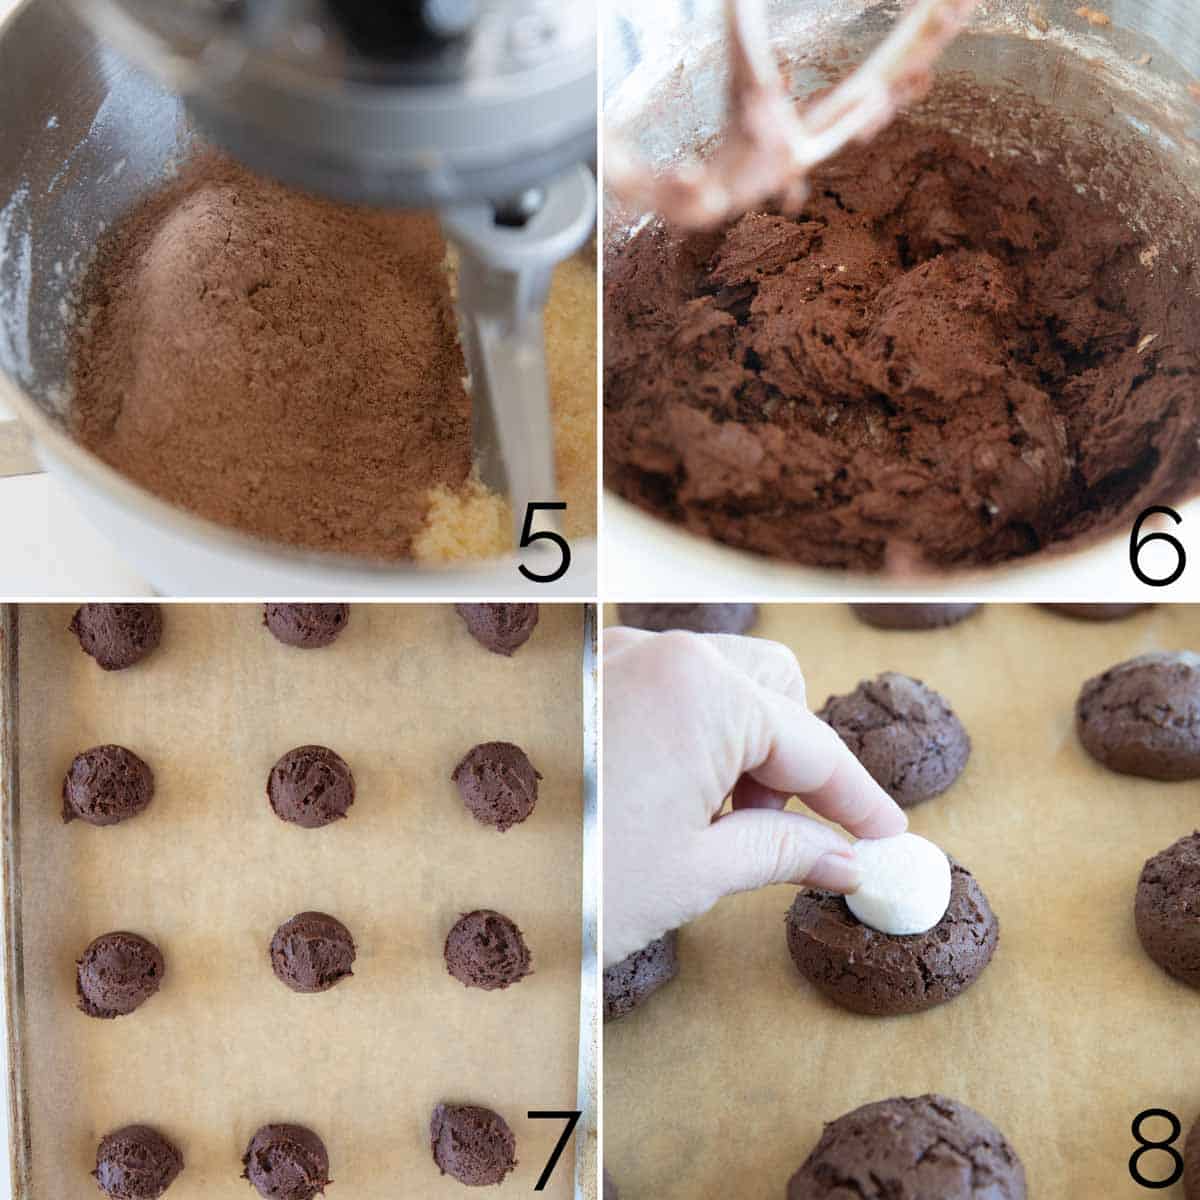 Making and shaping dough for chocolate marshmallow cookies.